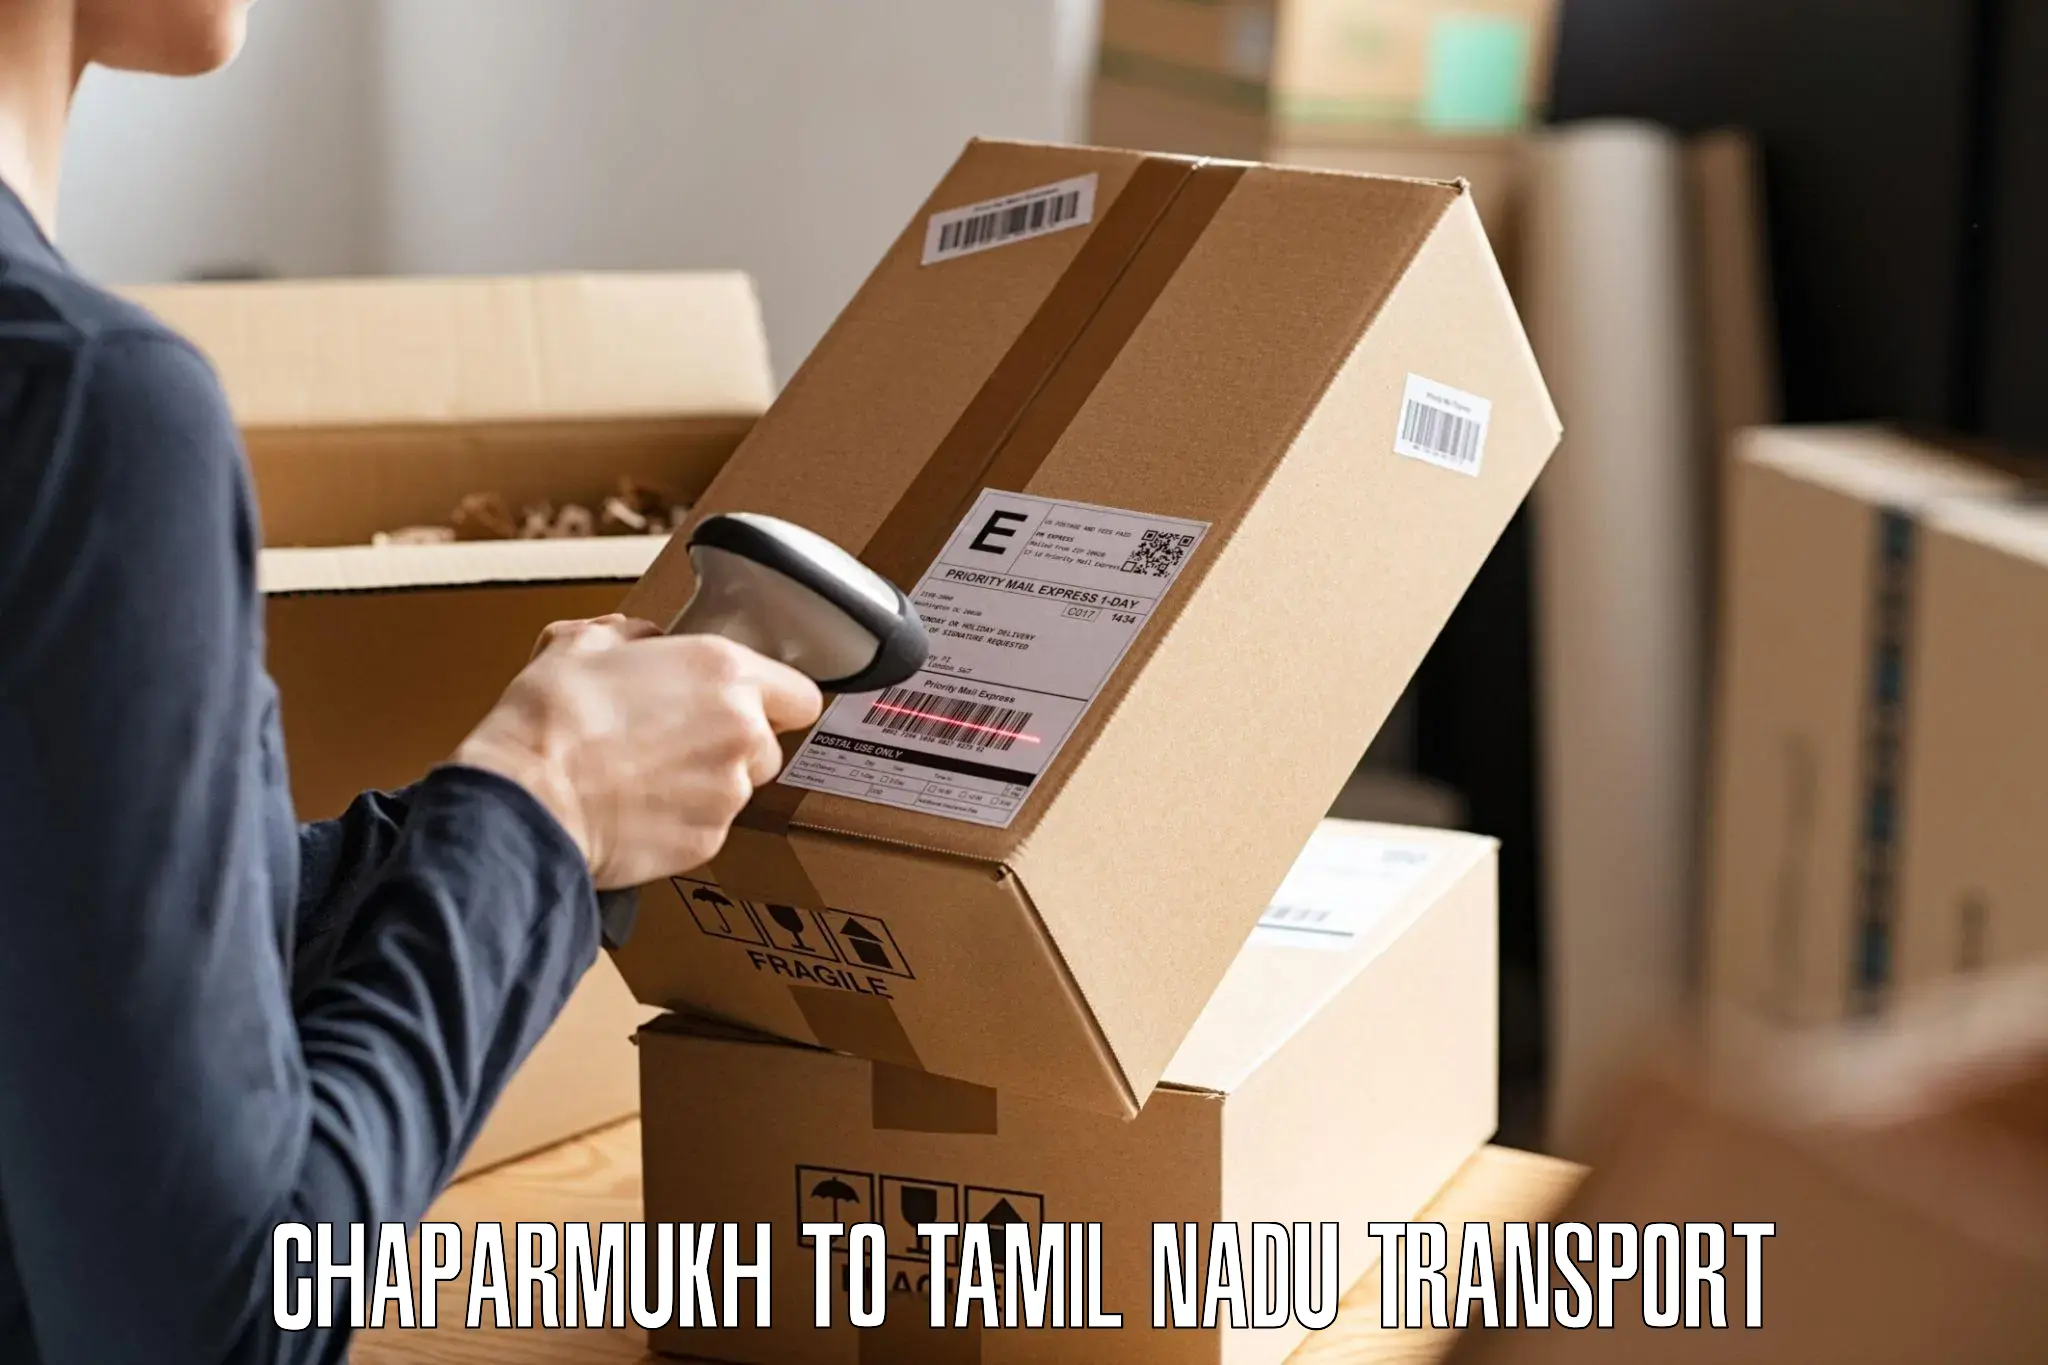 Transportation solution services Chaparmukh to Mettur